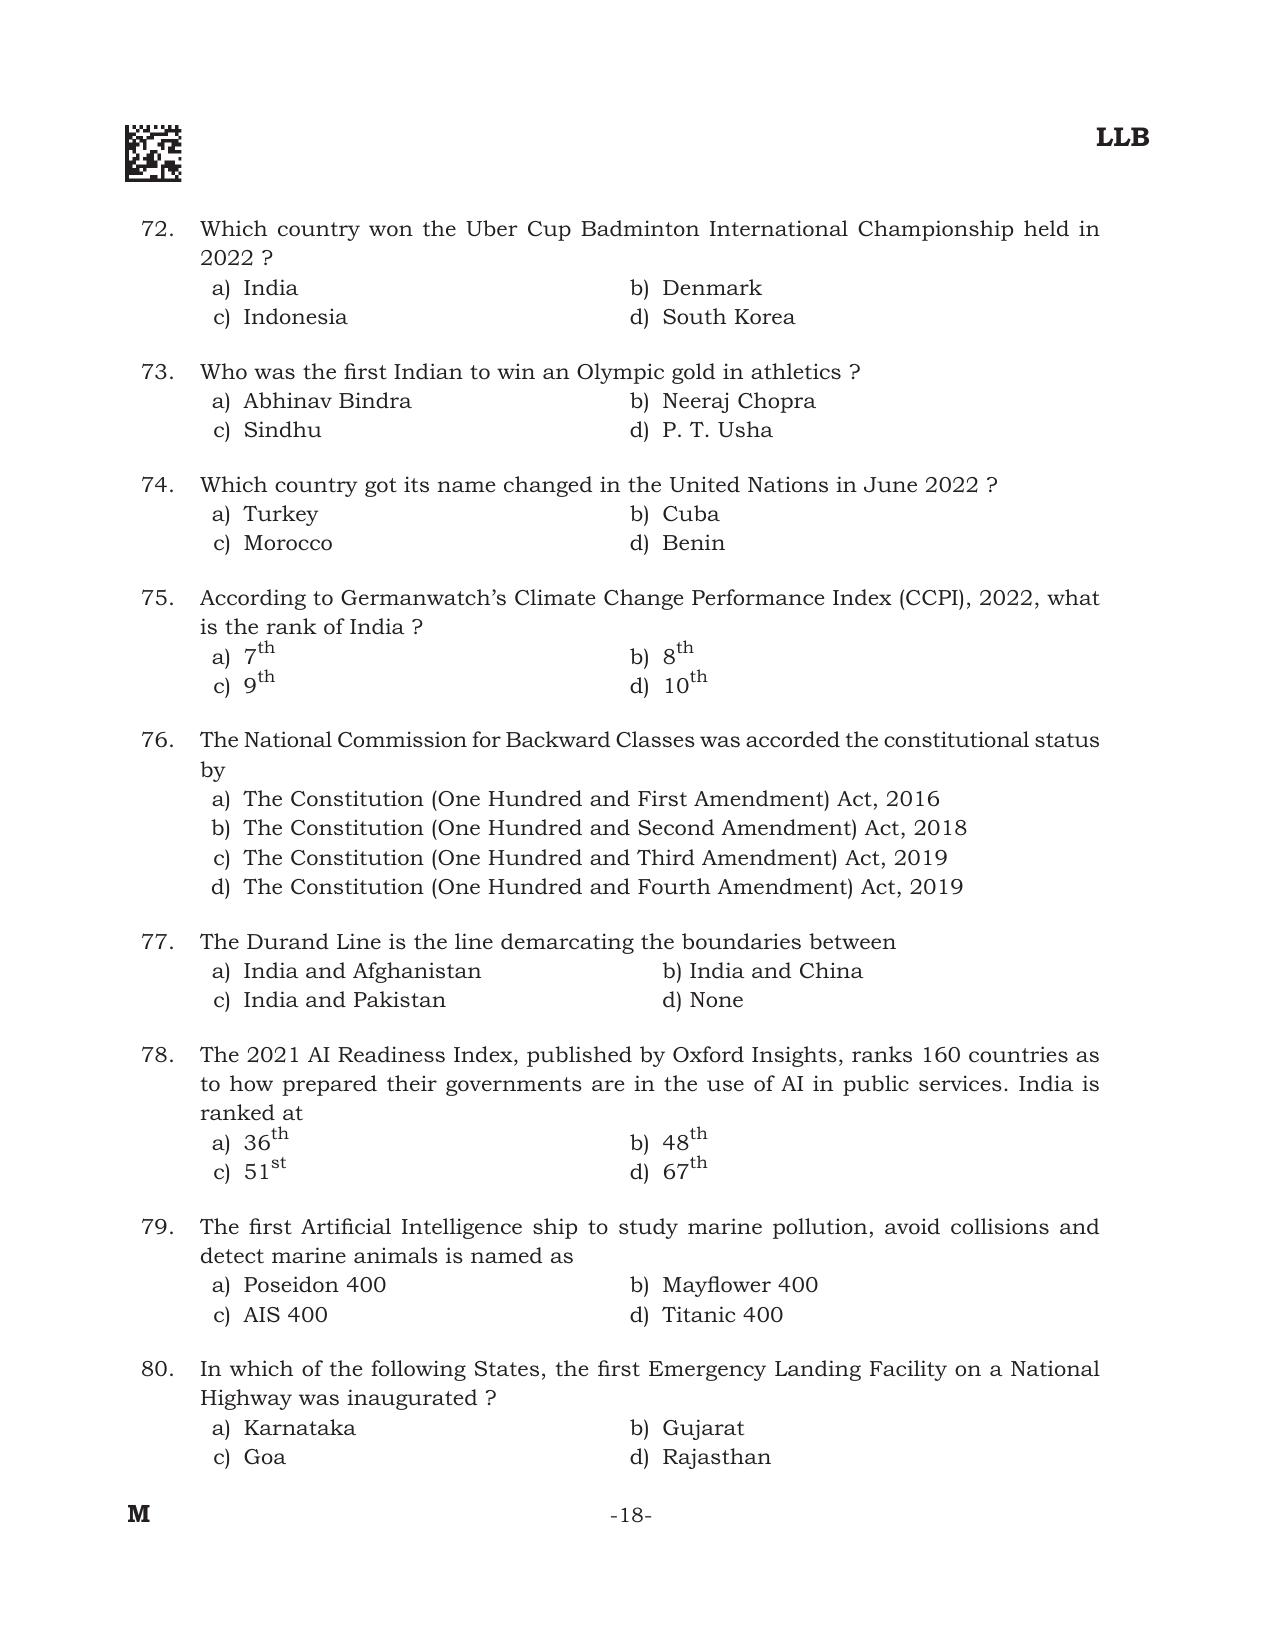 AILET 2022 Question Paper for BA LLB - Page 18